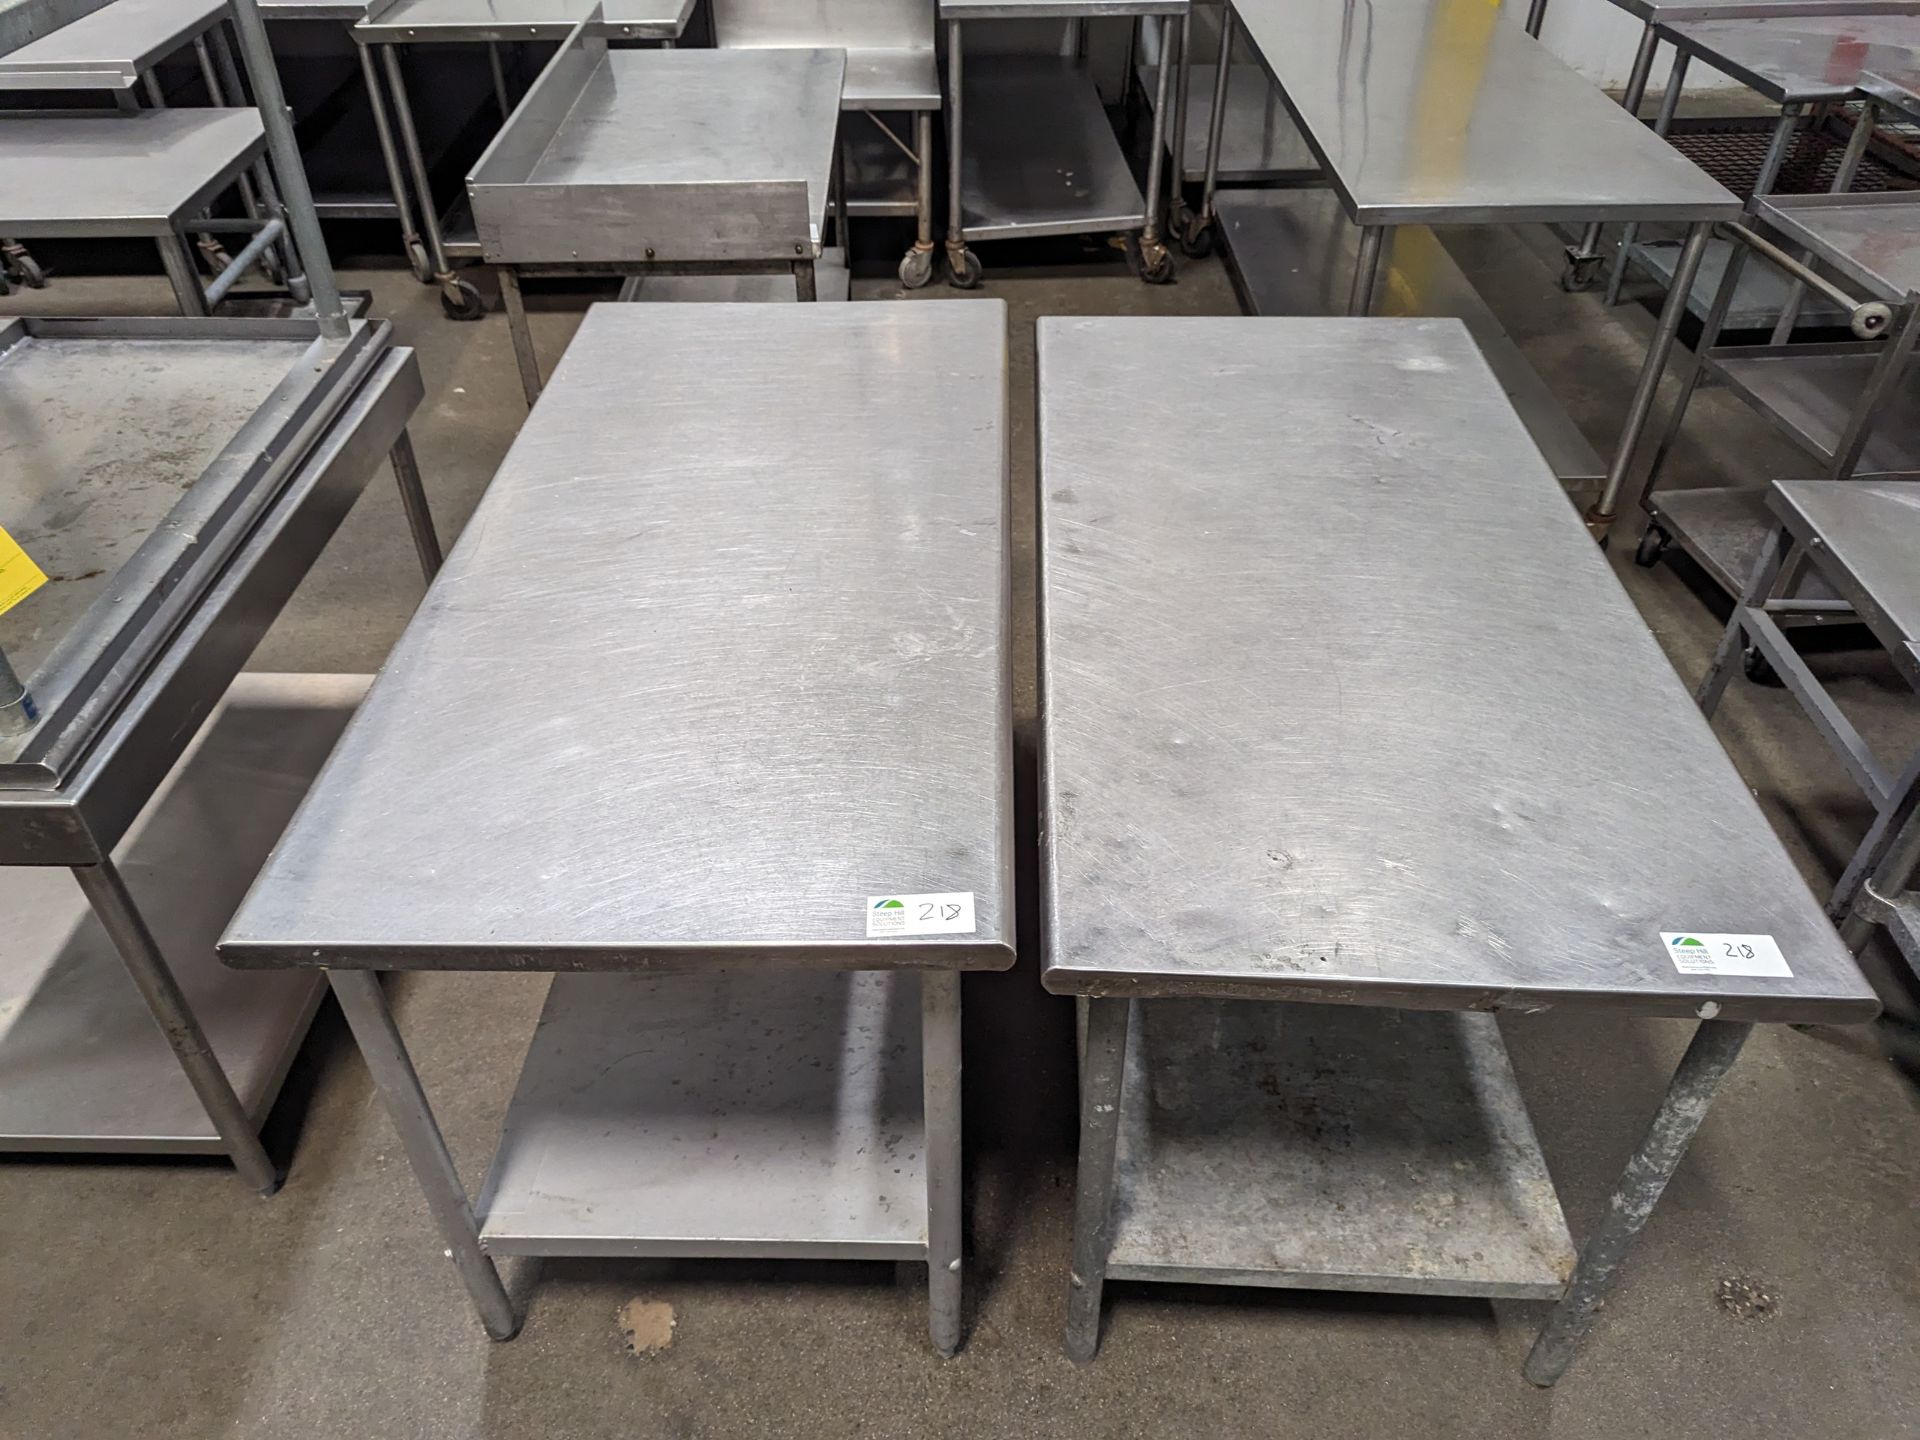 Lot of 2 5ft Long SS Tables, Dimensions LxWxH: 60x30x35 each